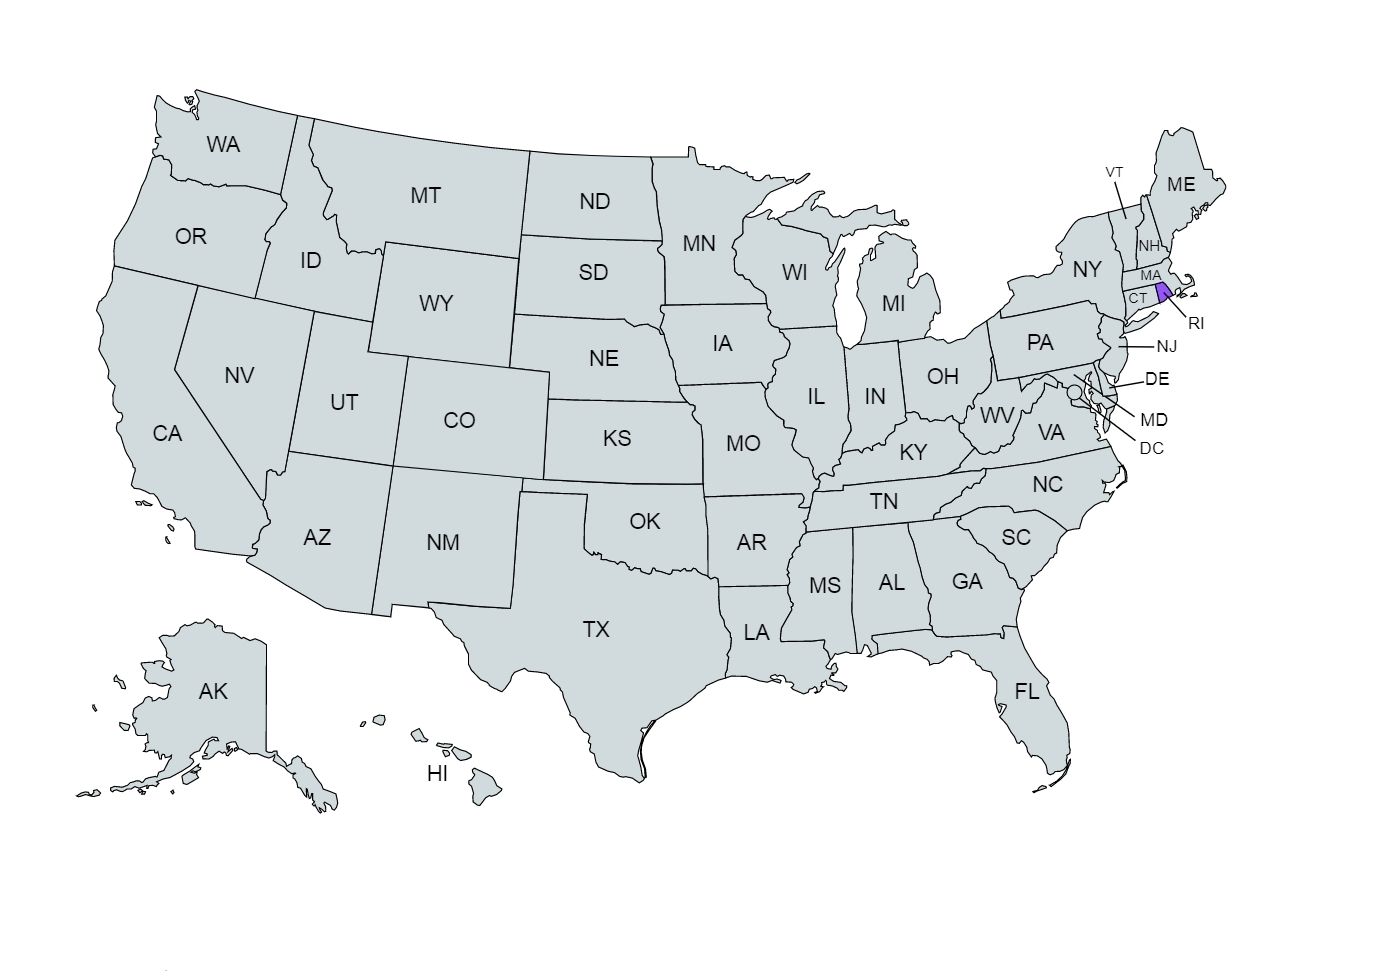 The US map with the Rhode Island state marked in purple